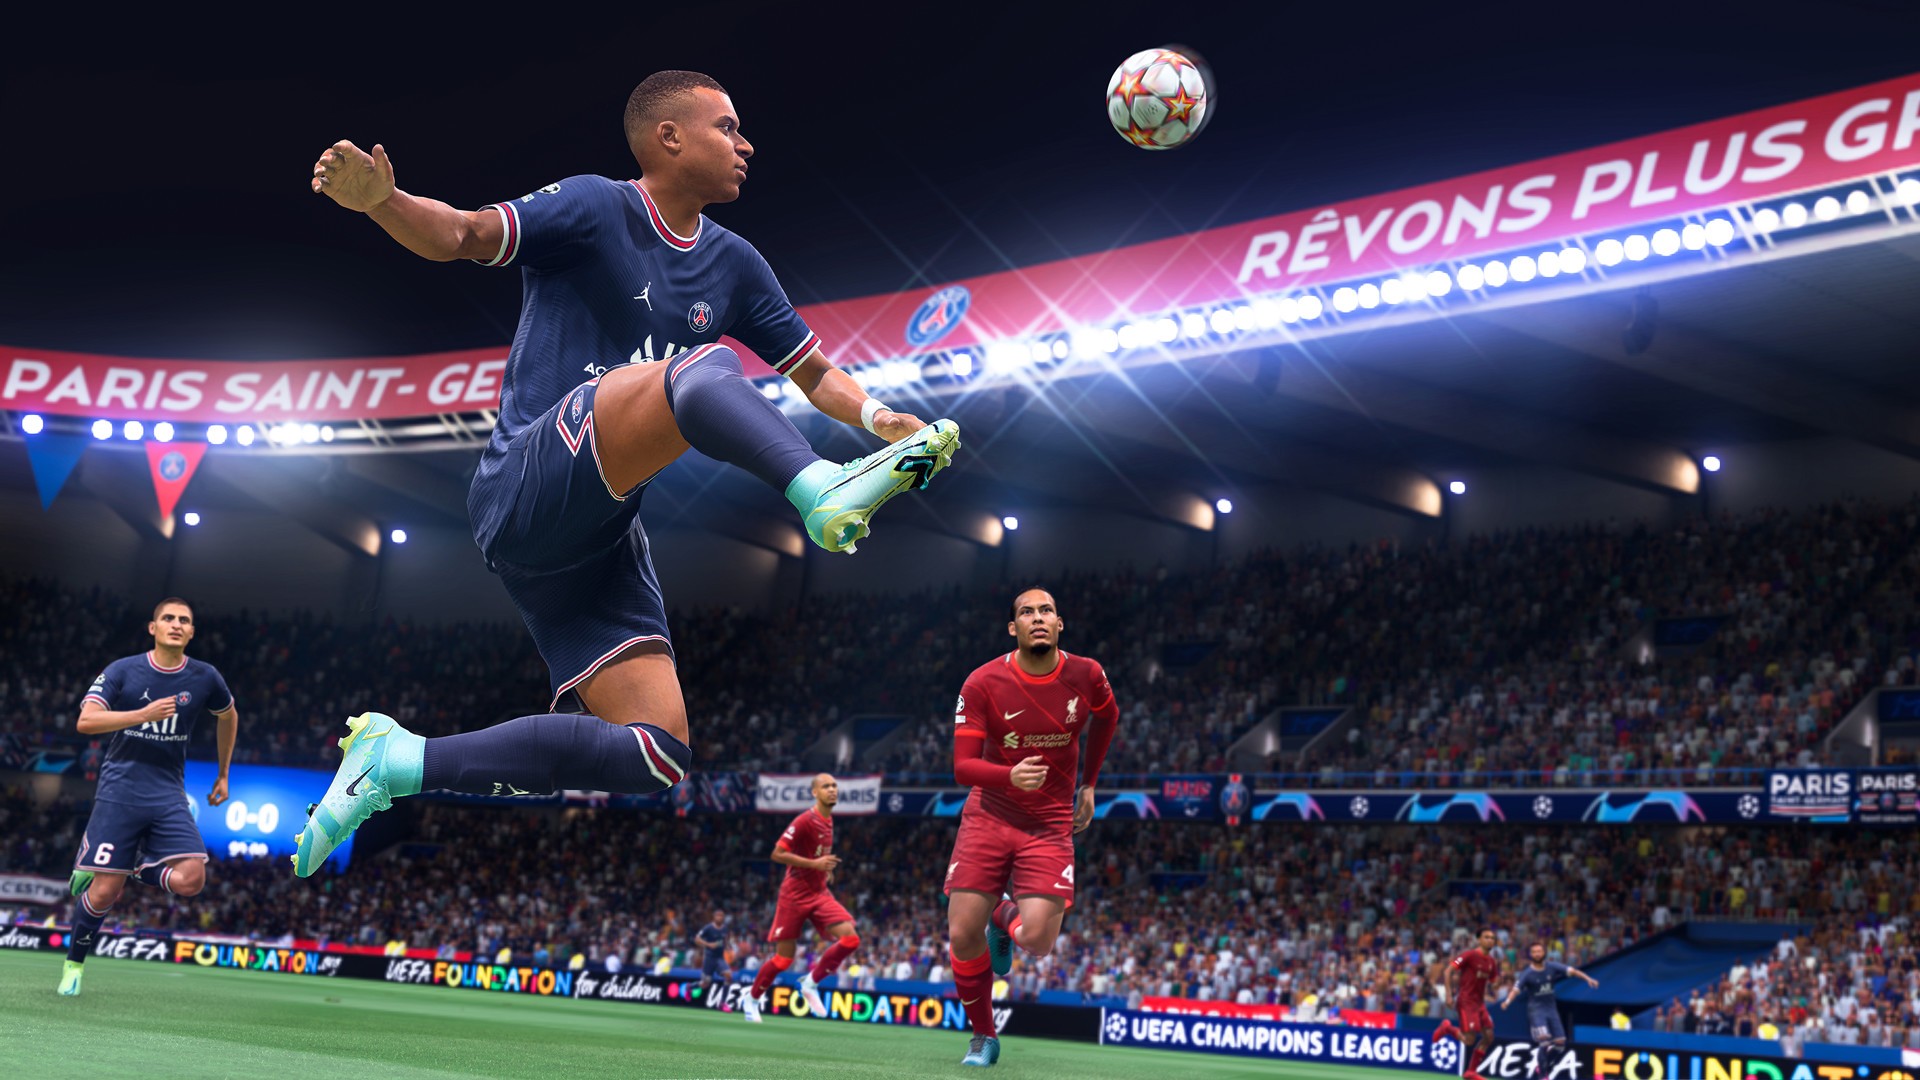 FIFA 22 cross-play test is coming to PS5 and Xbox Series X/S | GamesRadar+